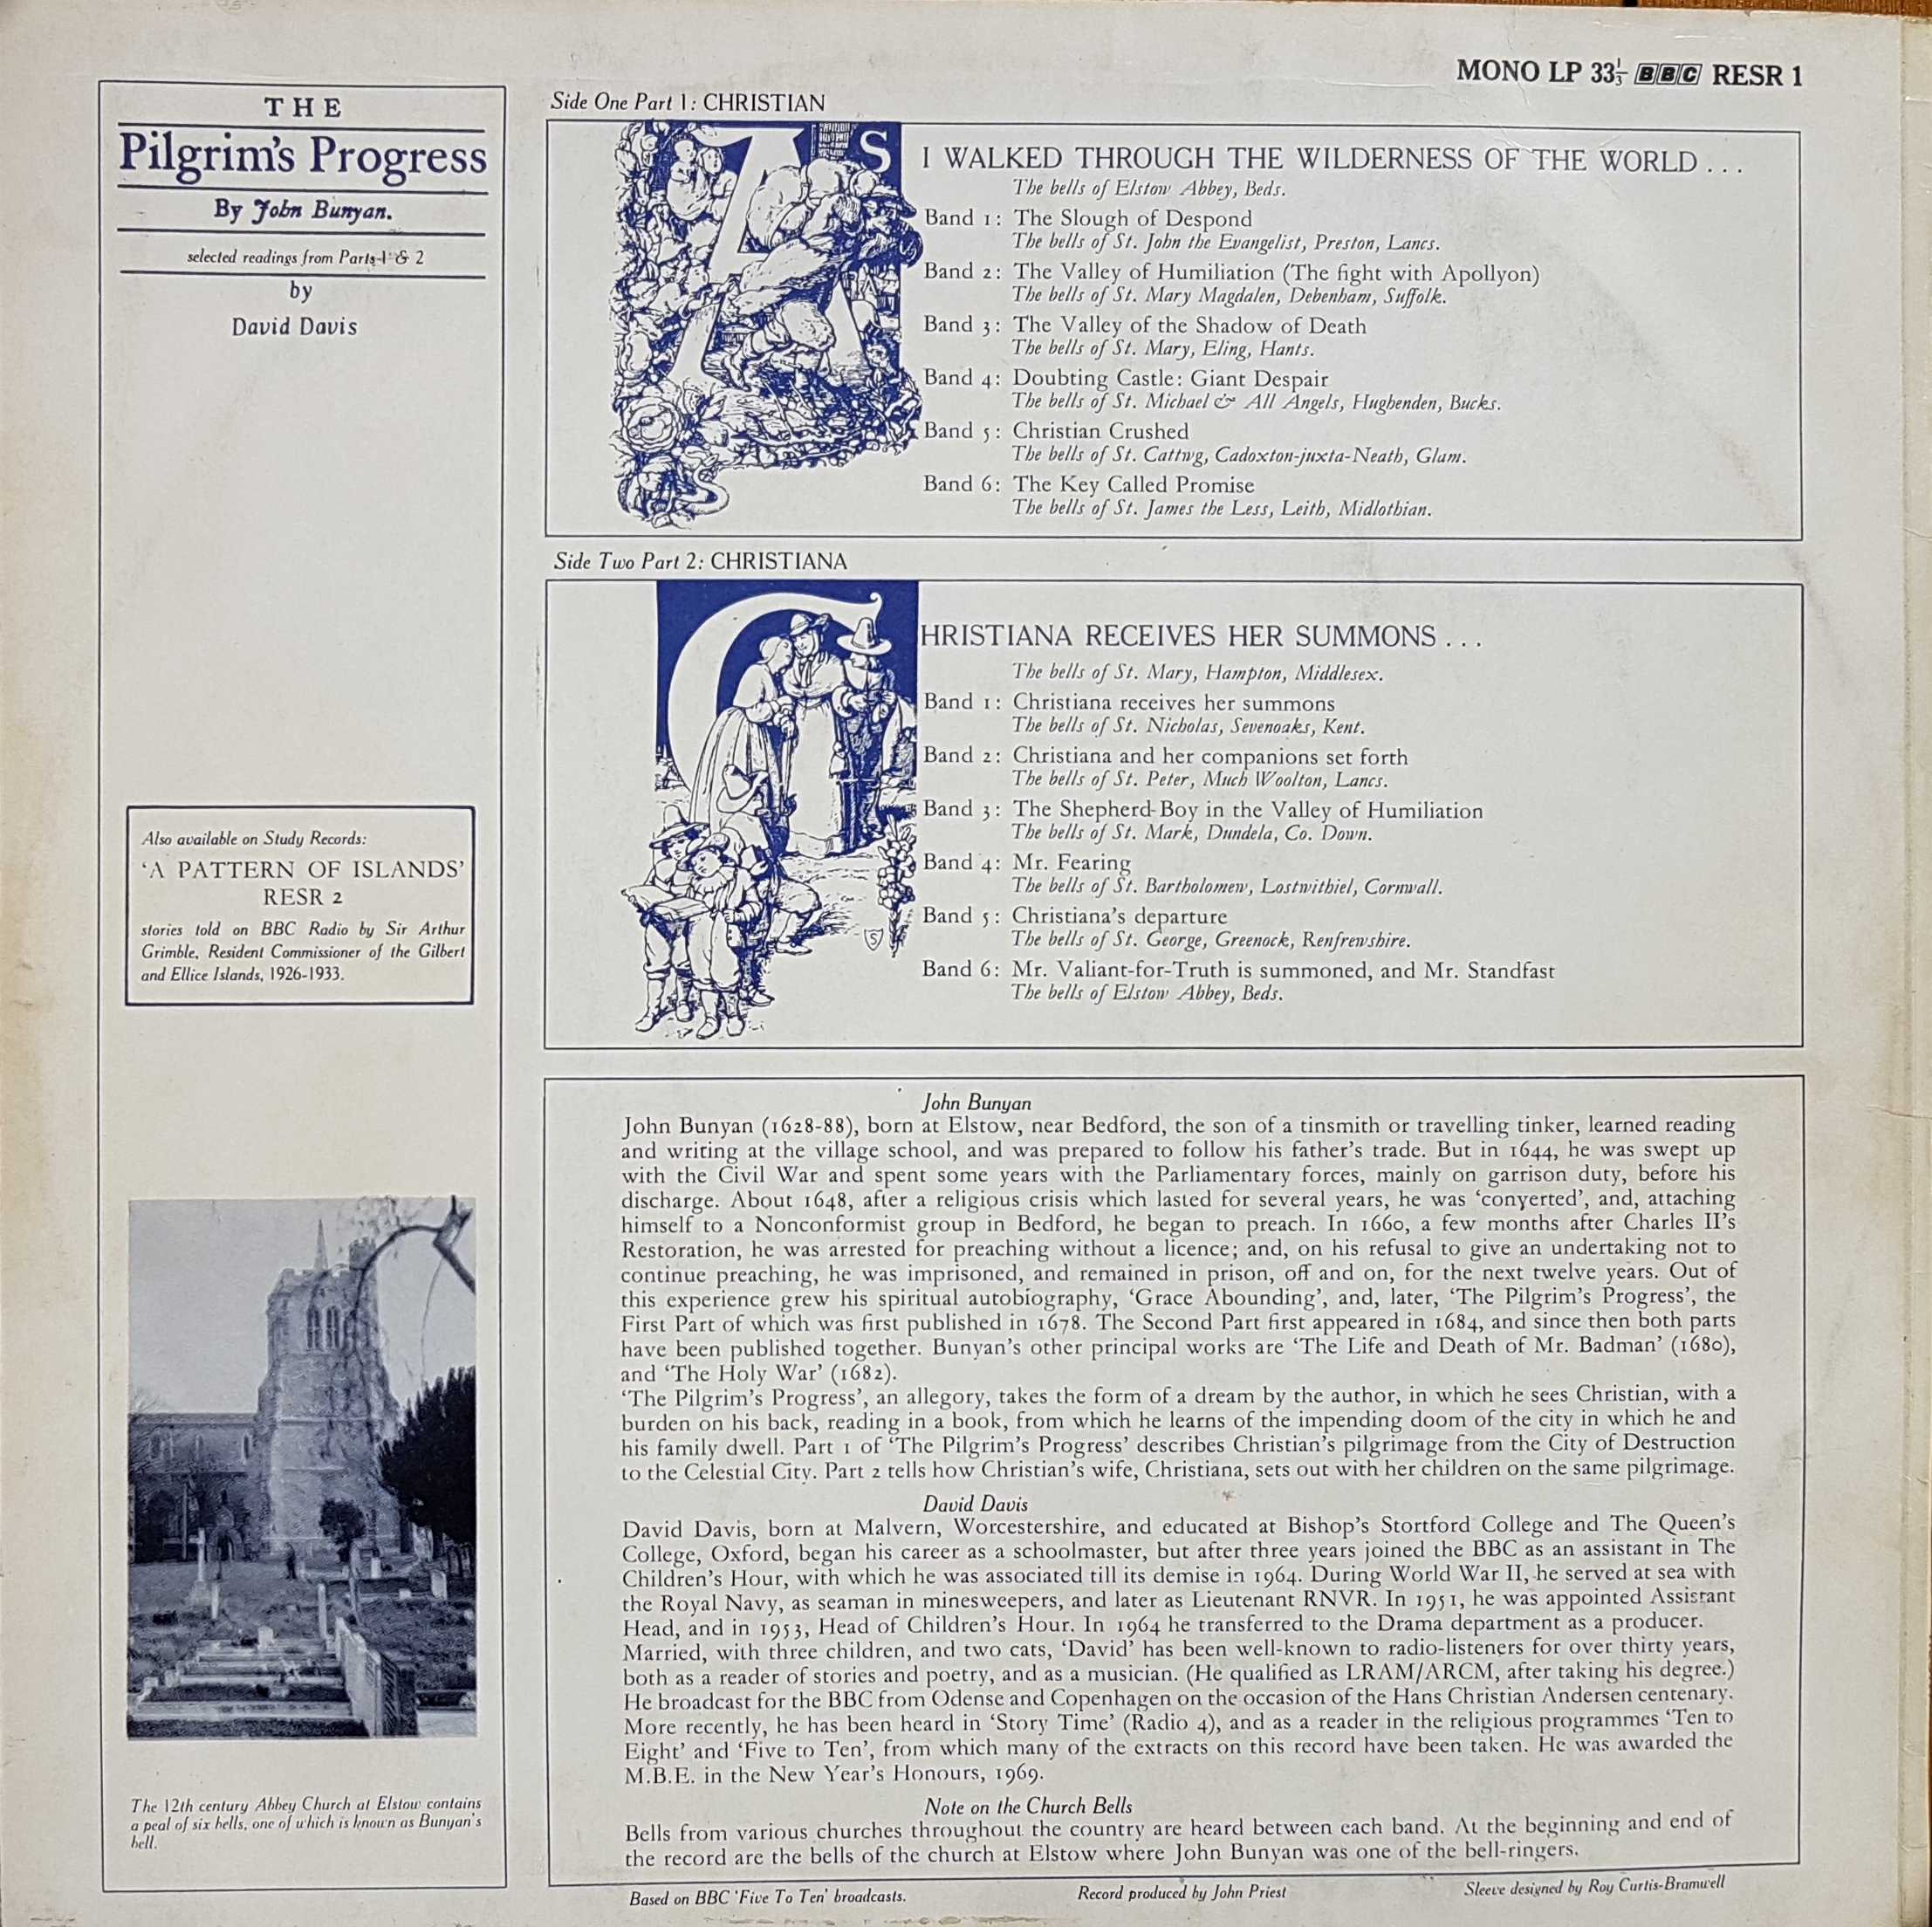 Picture of RESR 1 Pilgrim's Progress by artist John Bunyan / David Davis from the BBC records and Tapes library